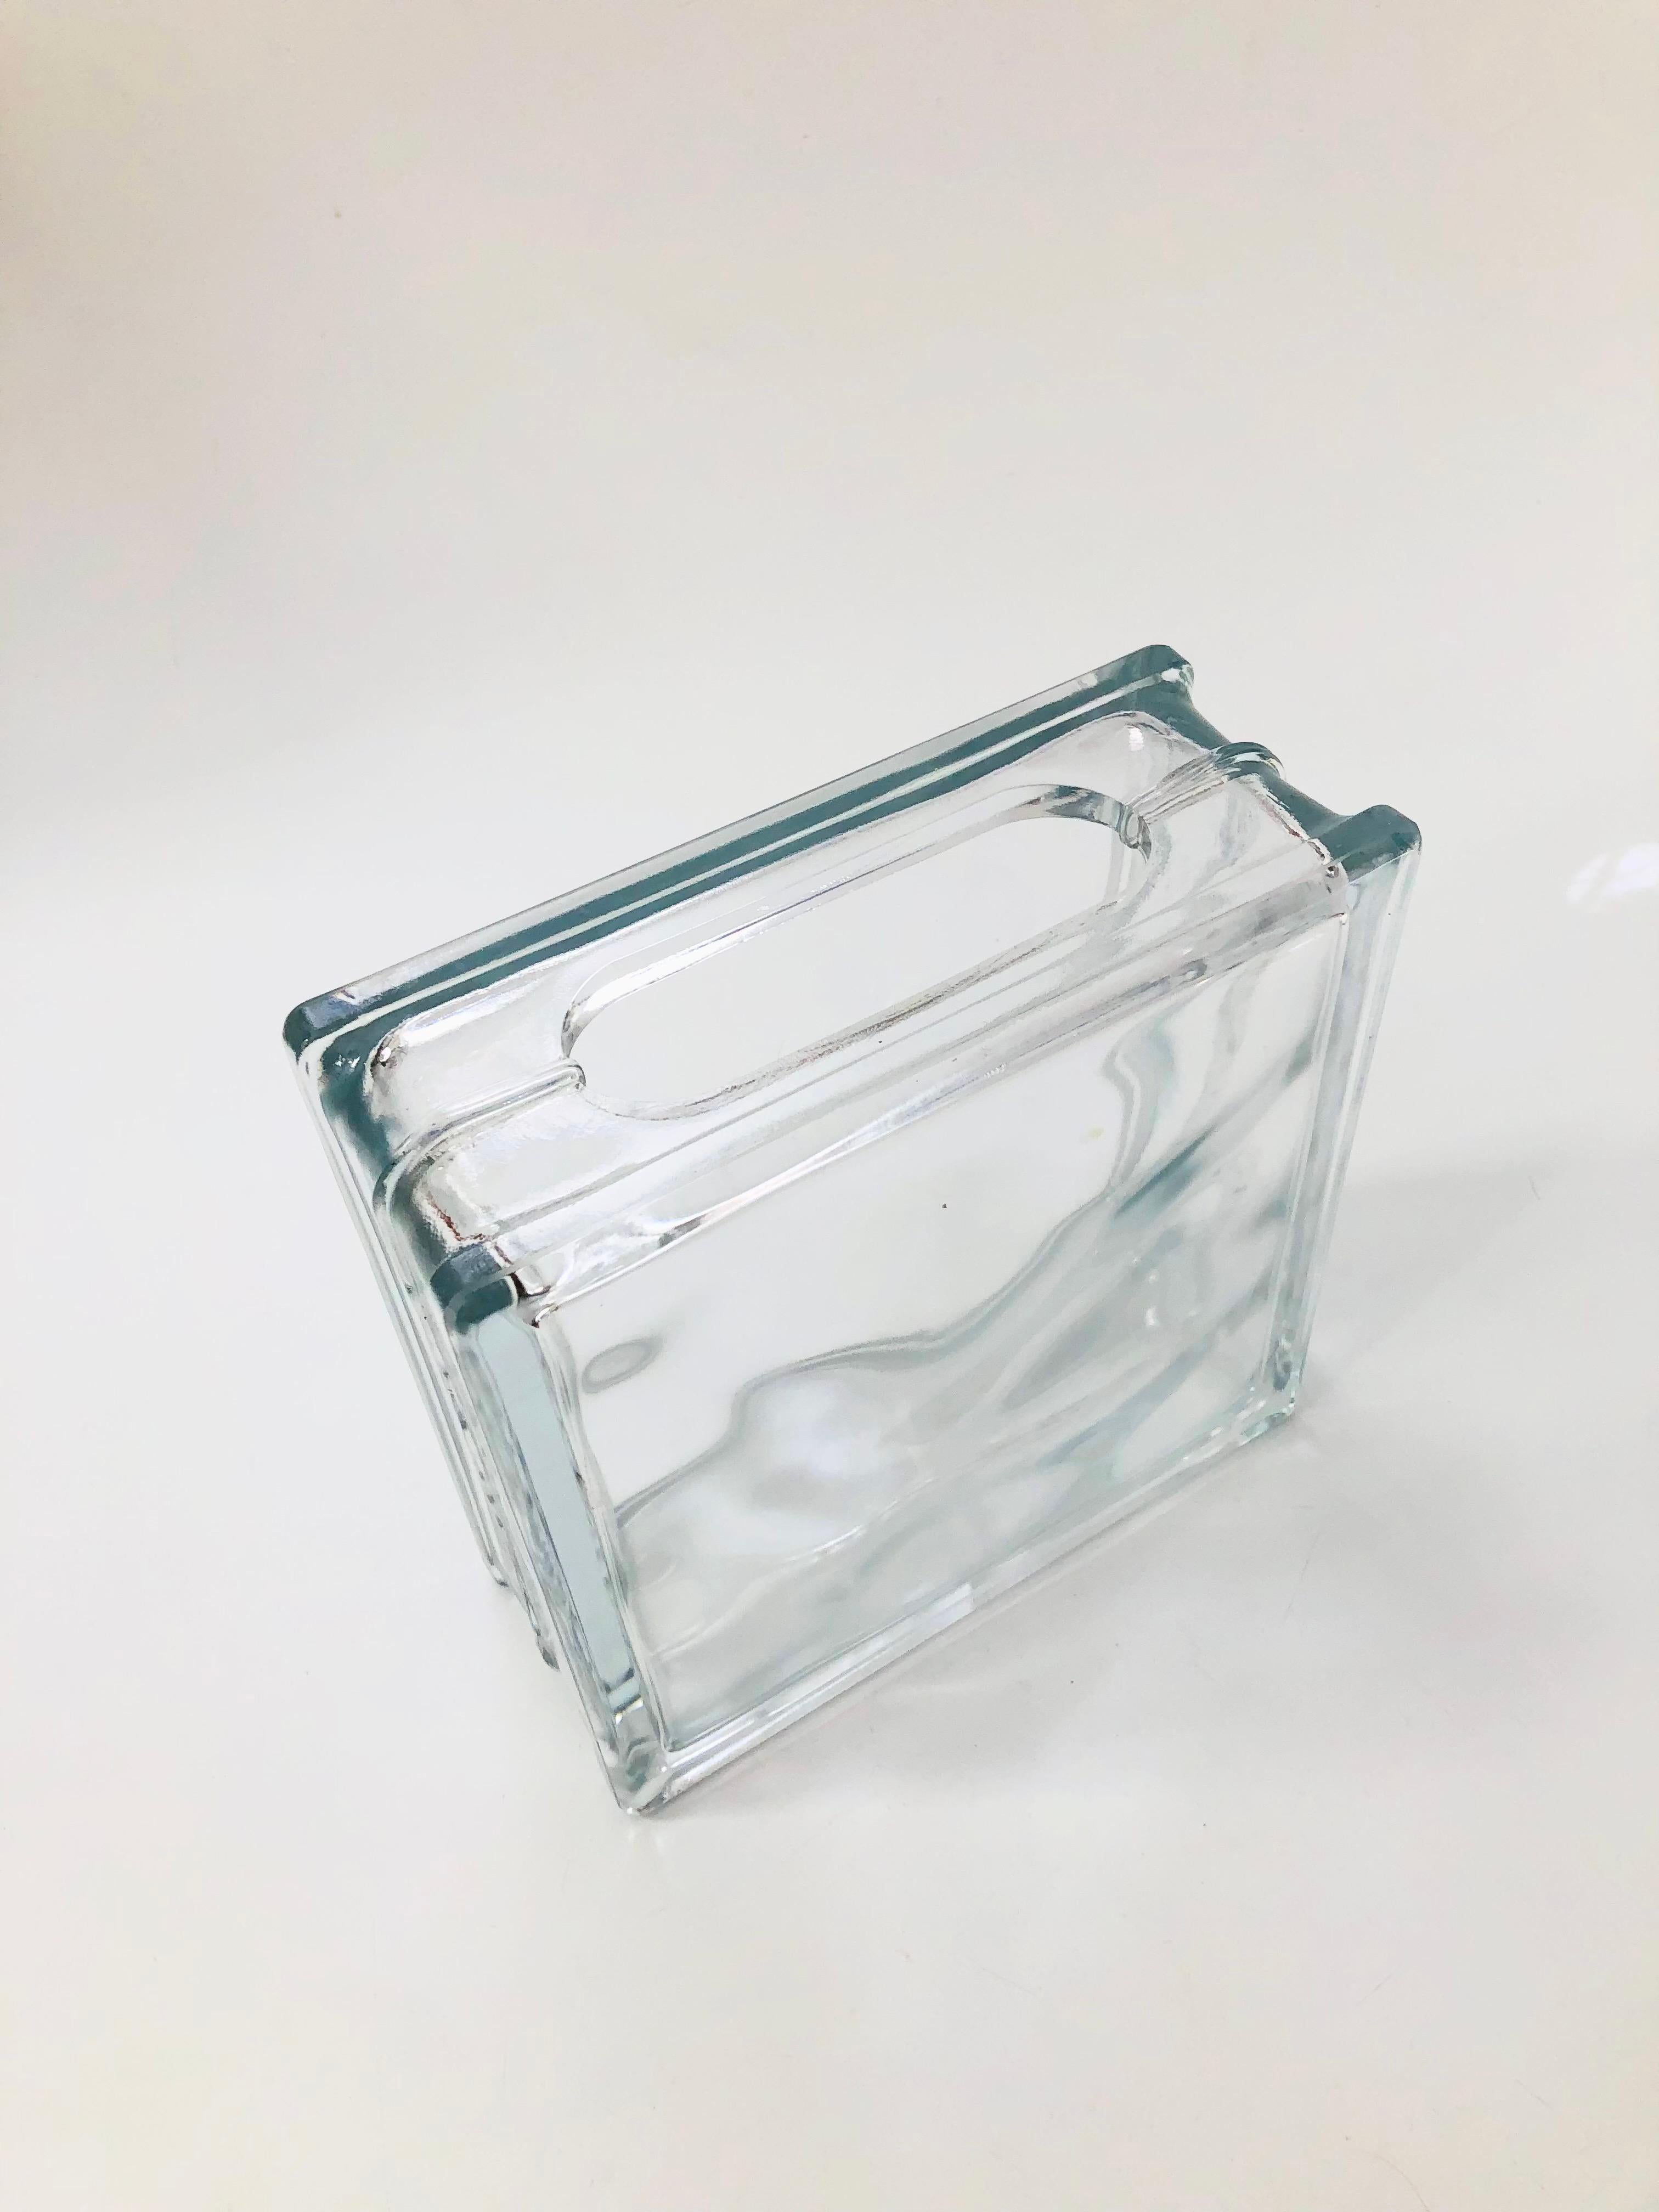 A unique vintage vase made from a glass block. A rounded rectangular opening has been cut into the top for use as a vase. Nice heavy weight, would work well doubling as a bookend.

